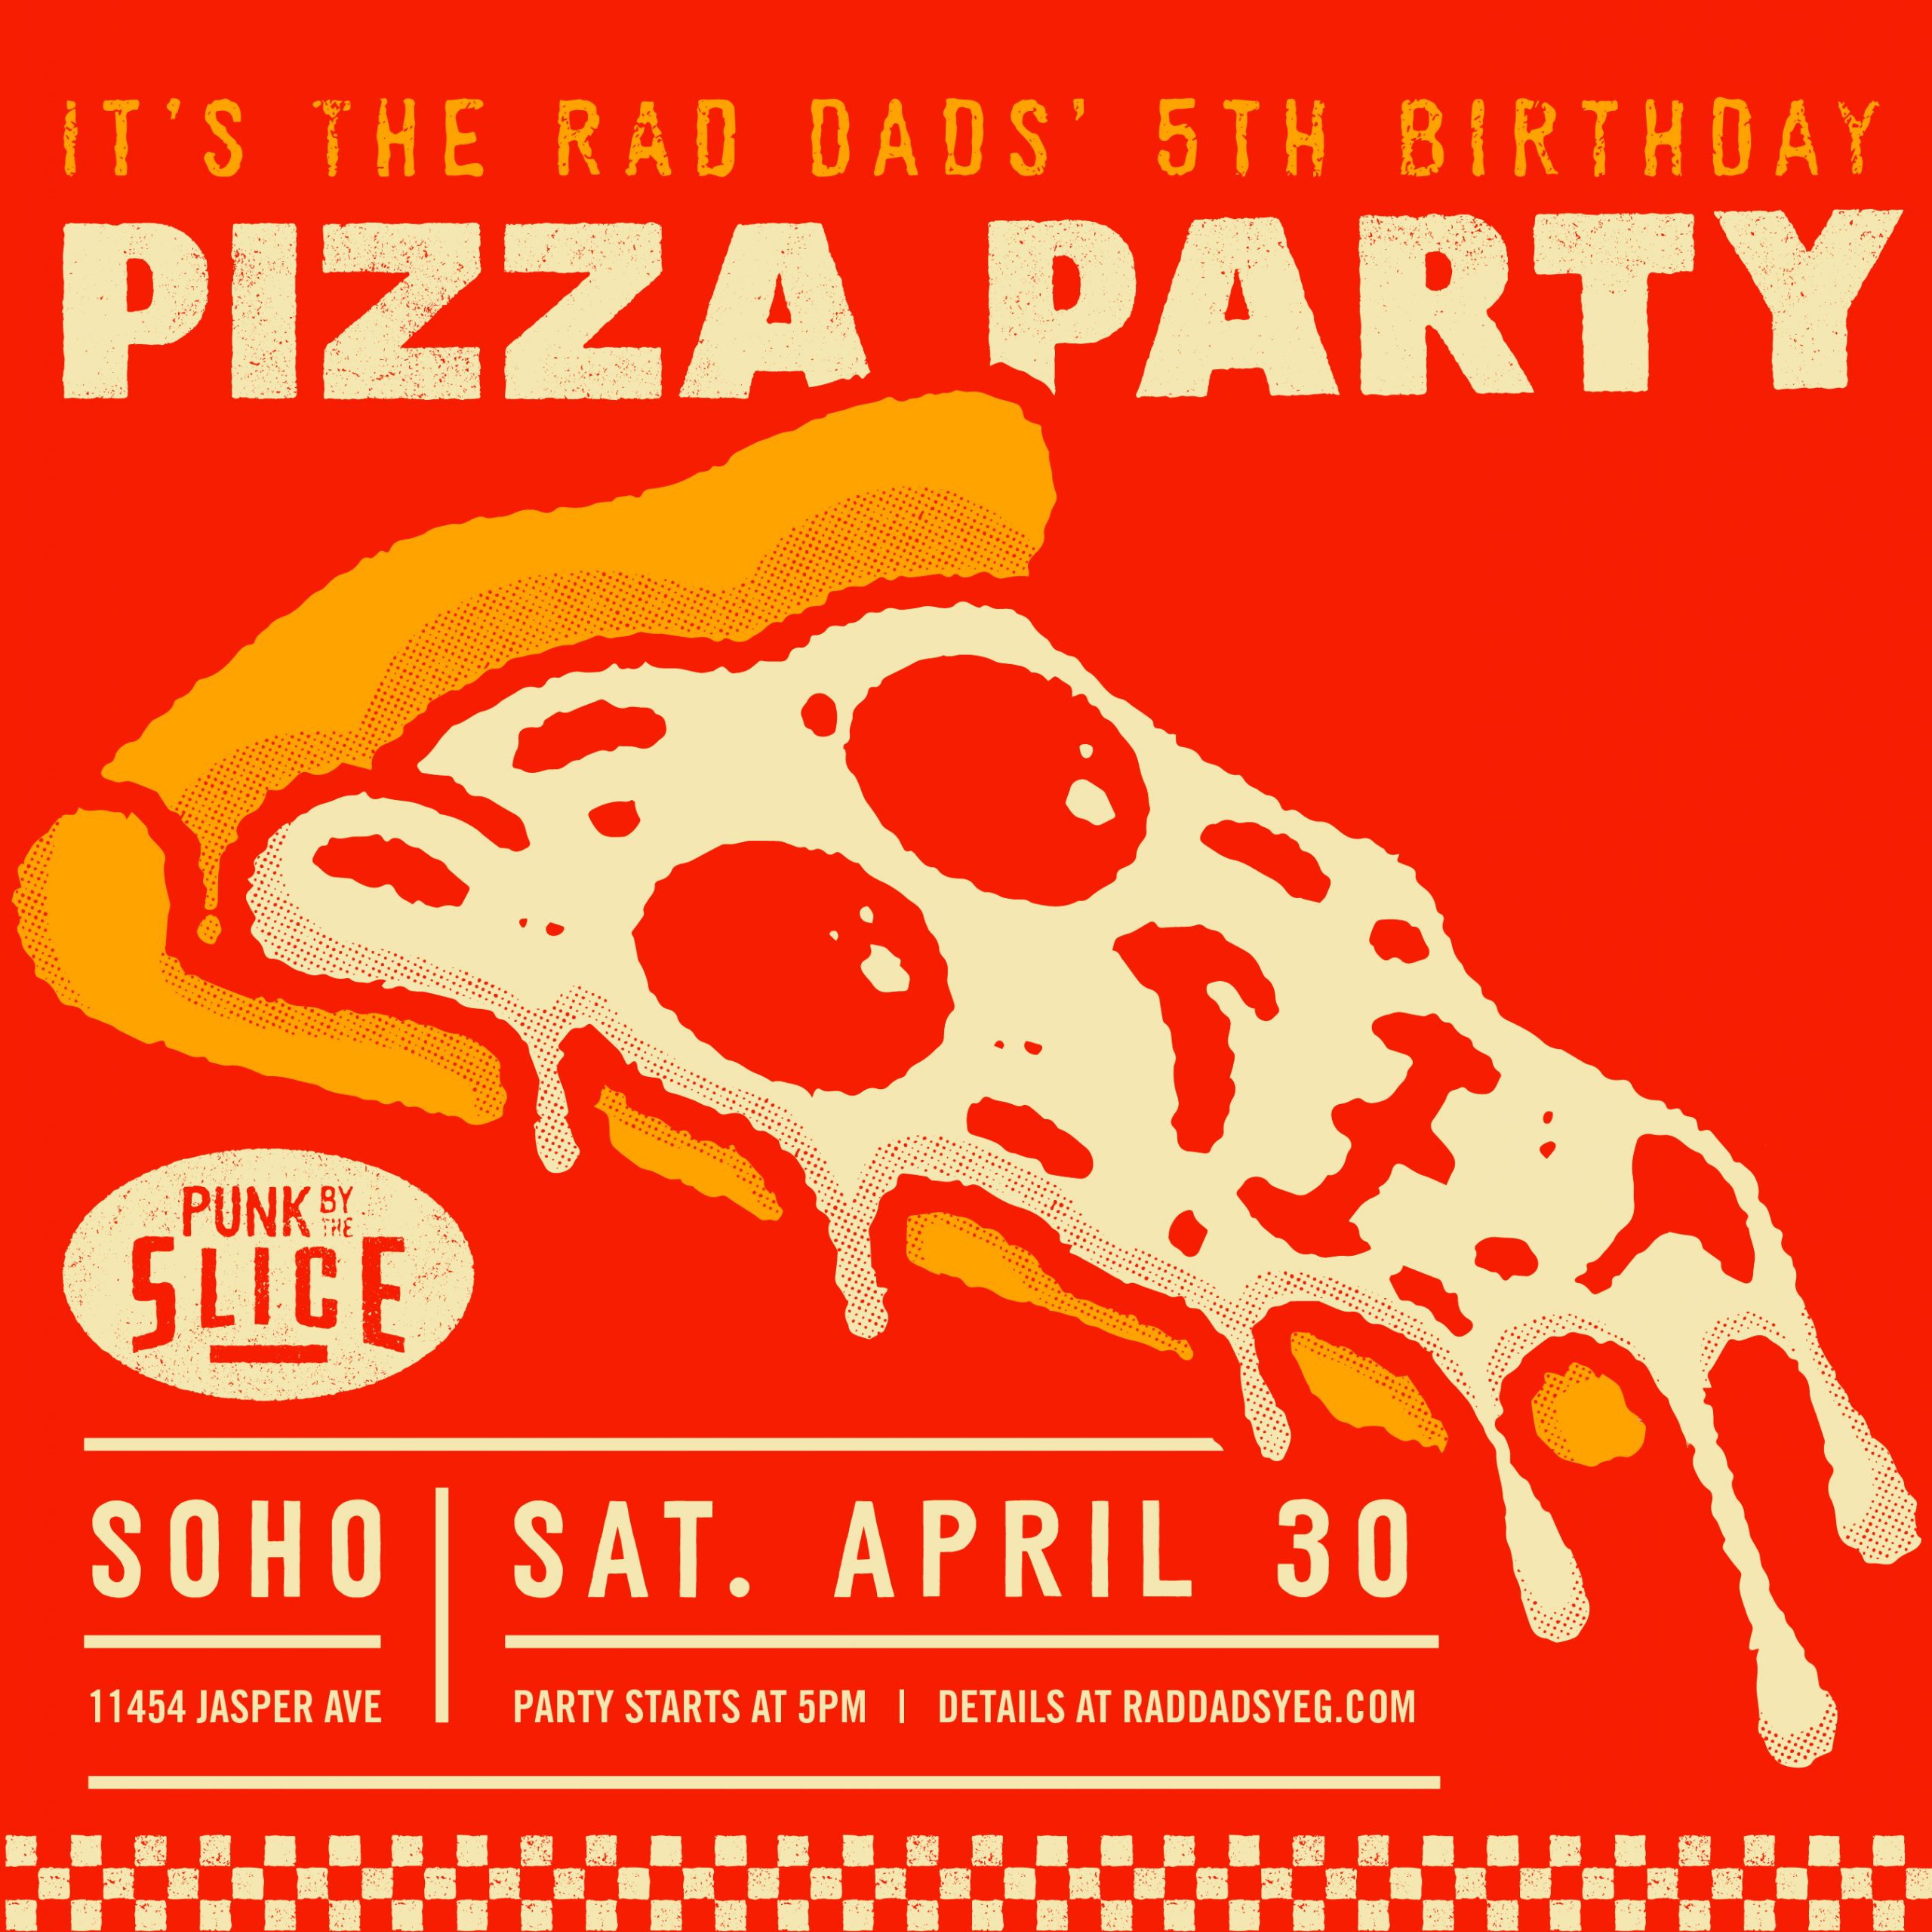 Rad Dads 5th Birthday Pizza Party